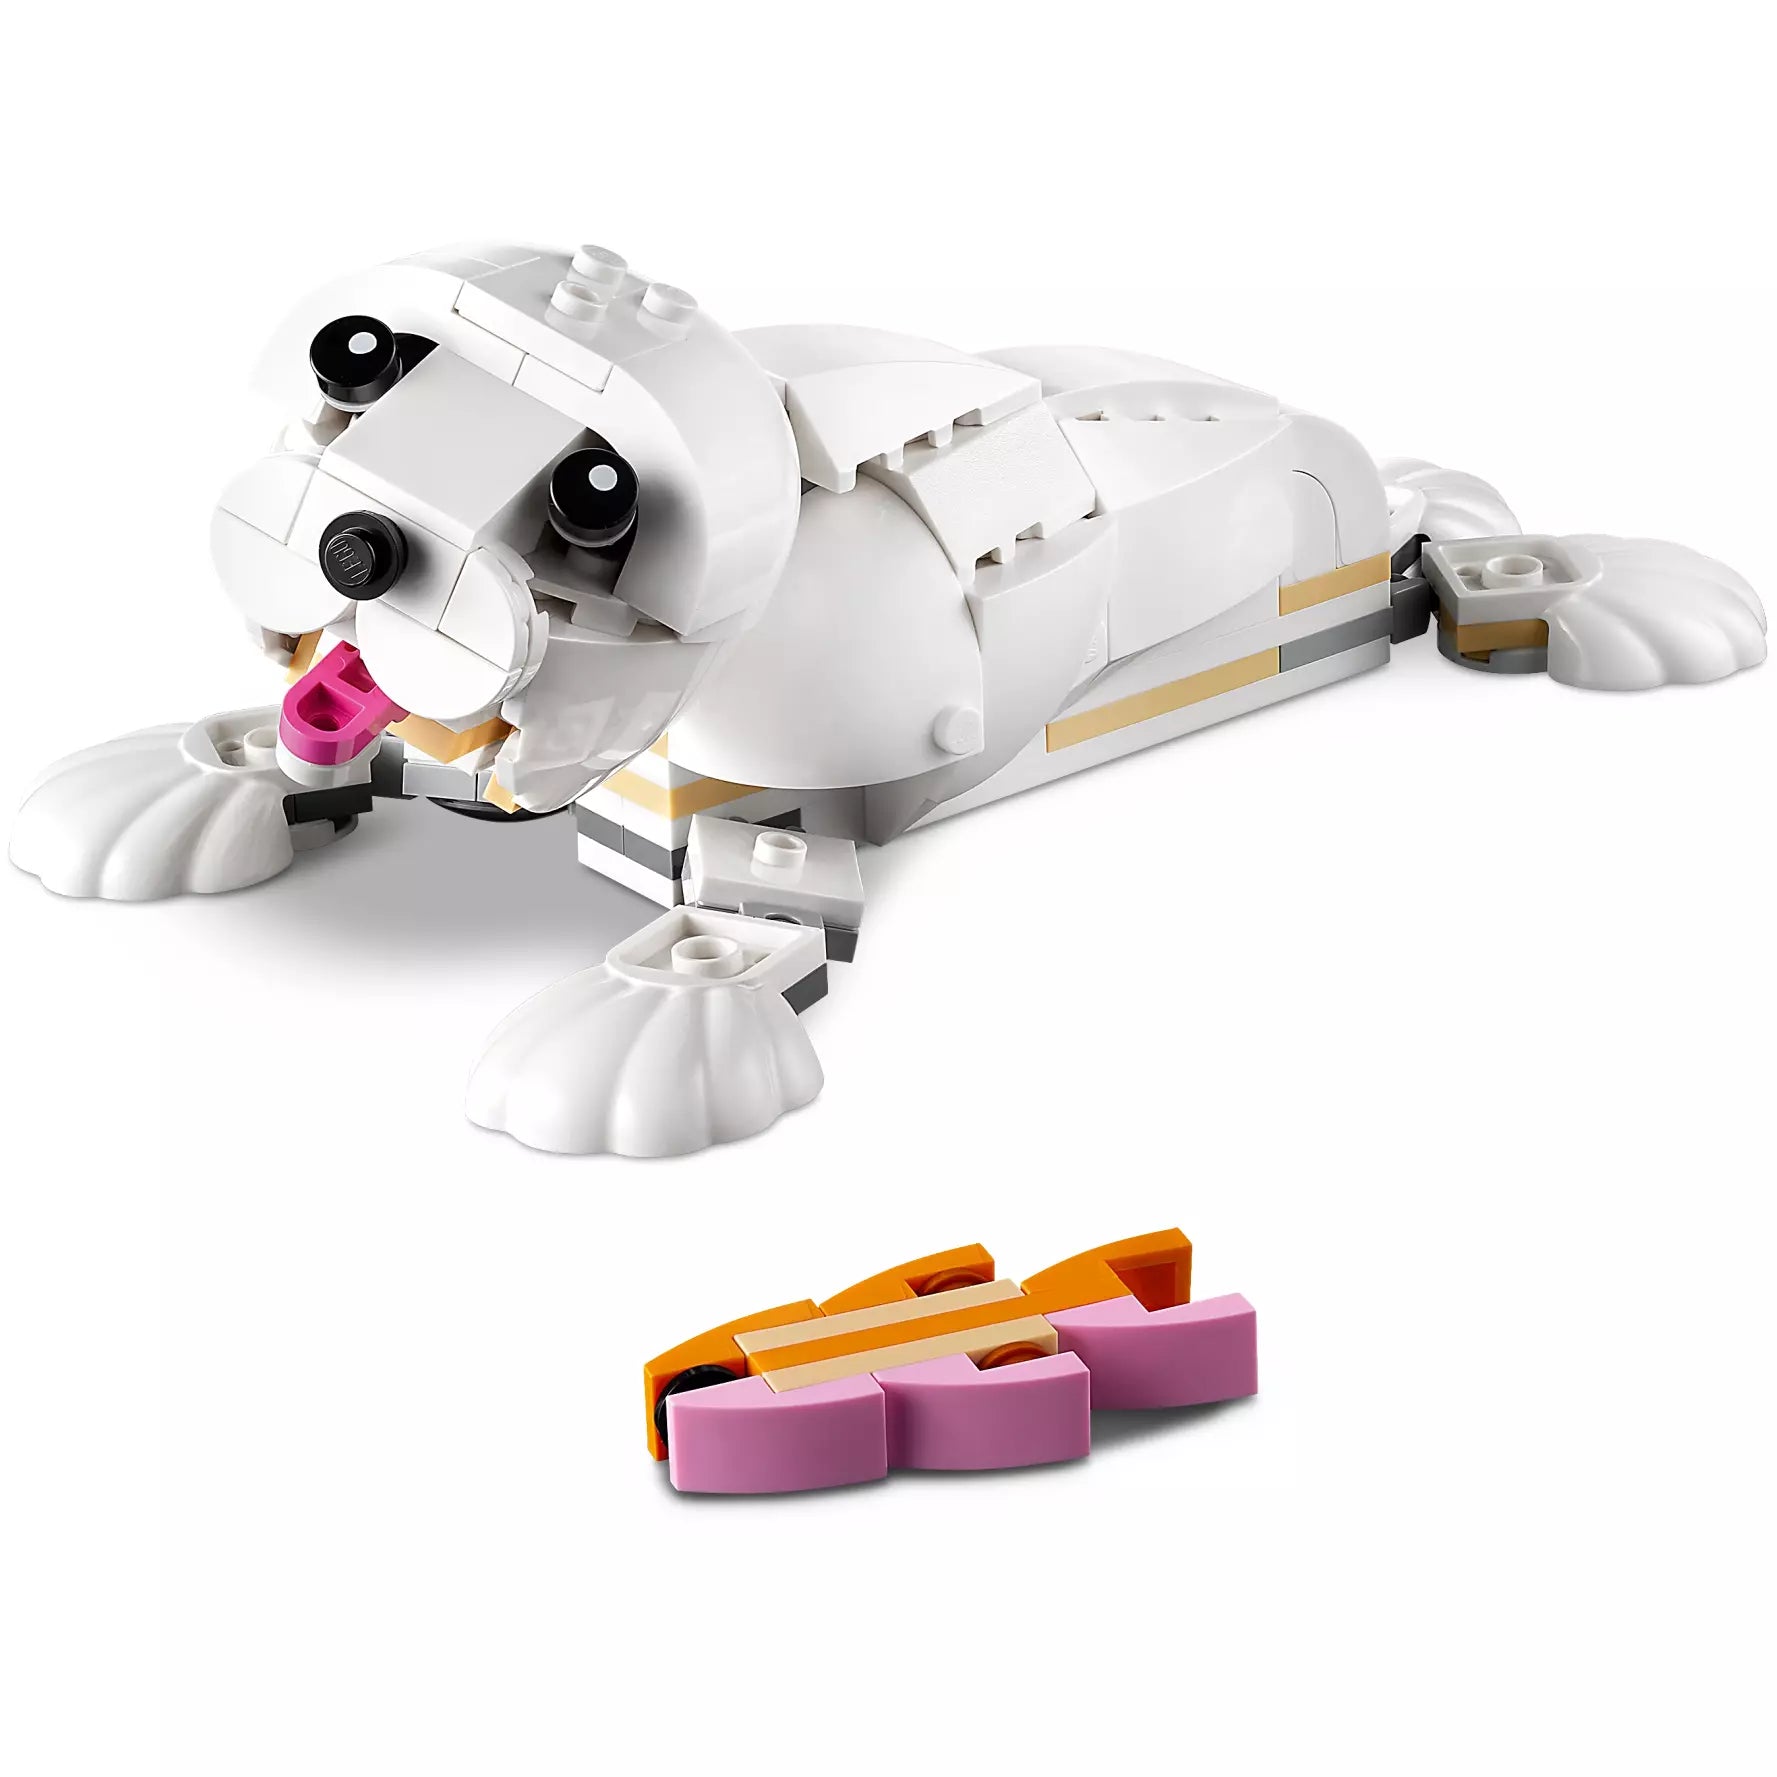 LEGO 31133 Creator 3in1 White Rabbit Animal Toy Building Set, Easter Bunny to Seal and Parrot Figures. - BumbleToys - 5-7 Years, Boys, Creator, Creator 3In1, LEGO, OXE, Pre-Order, White Rabbit